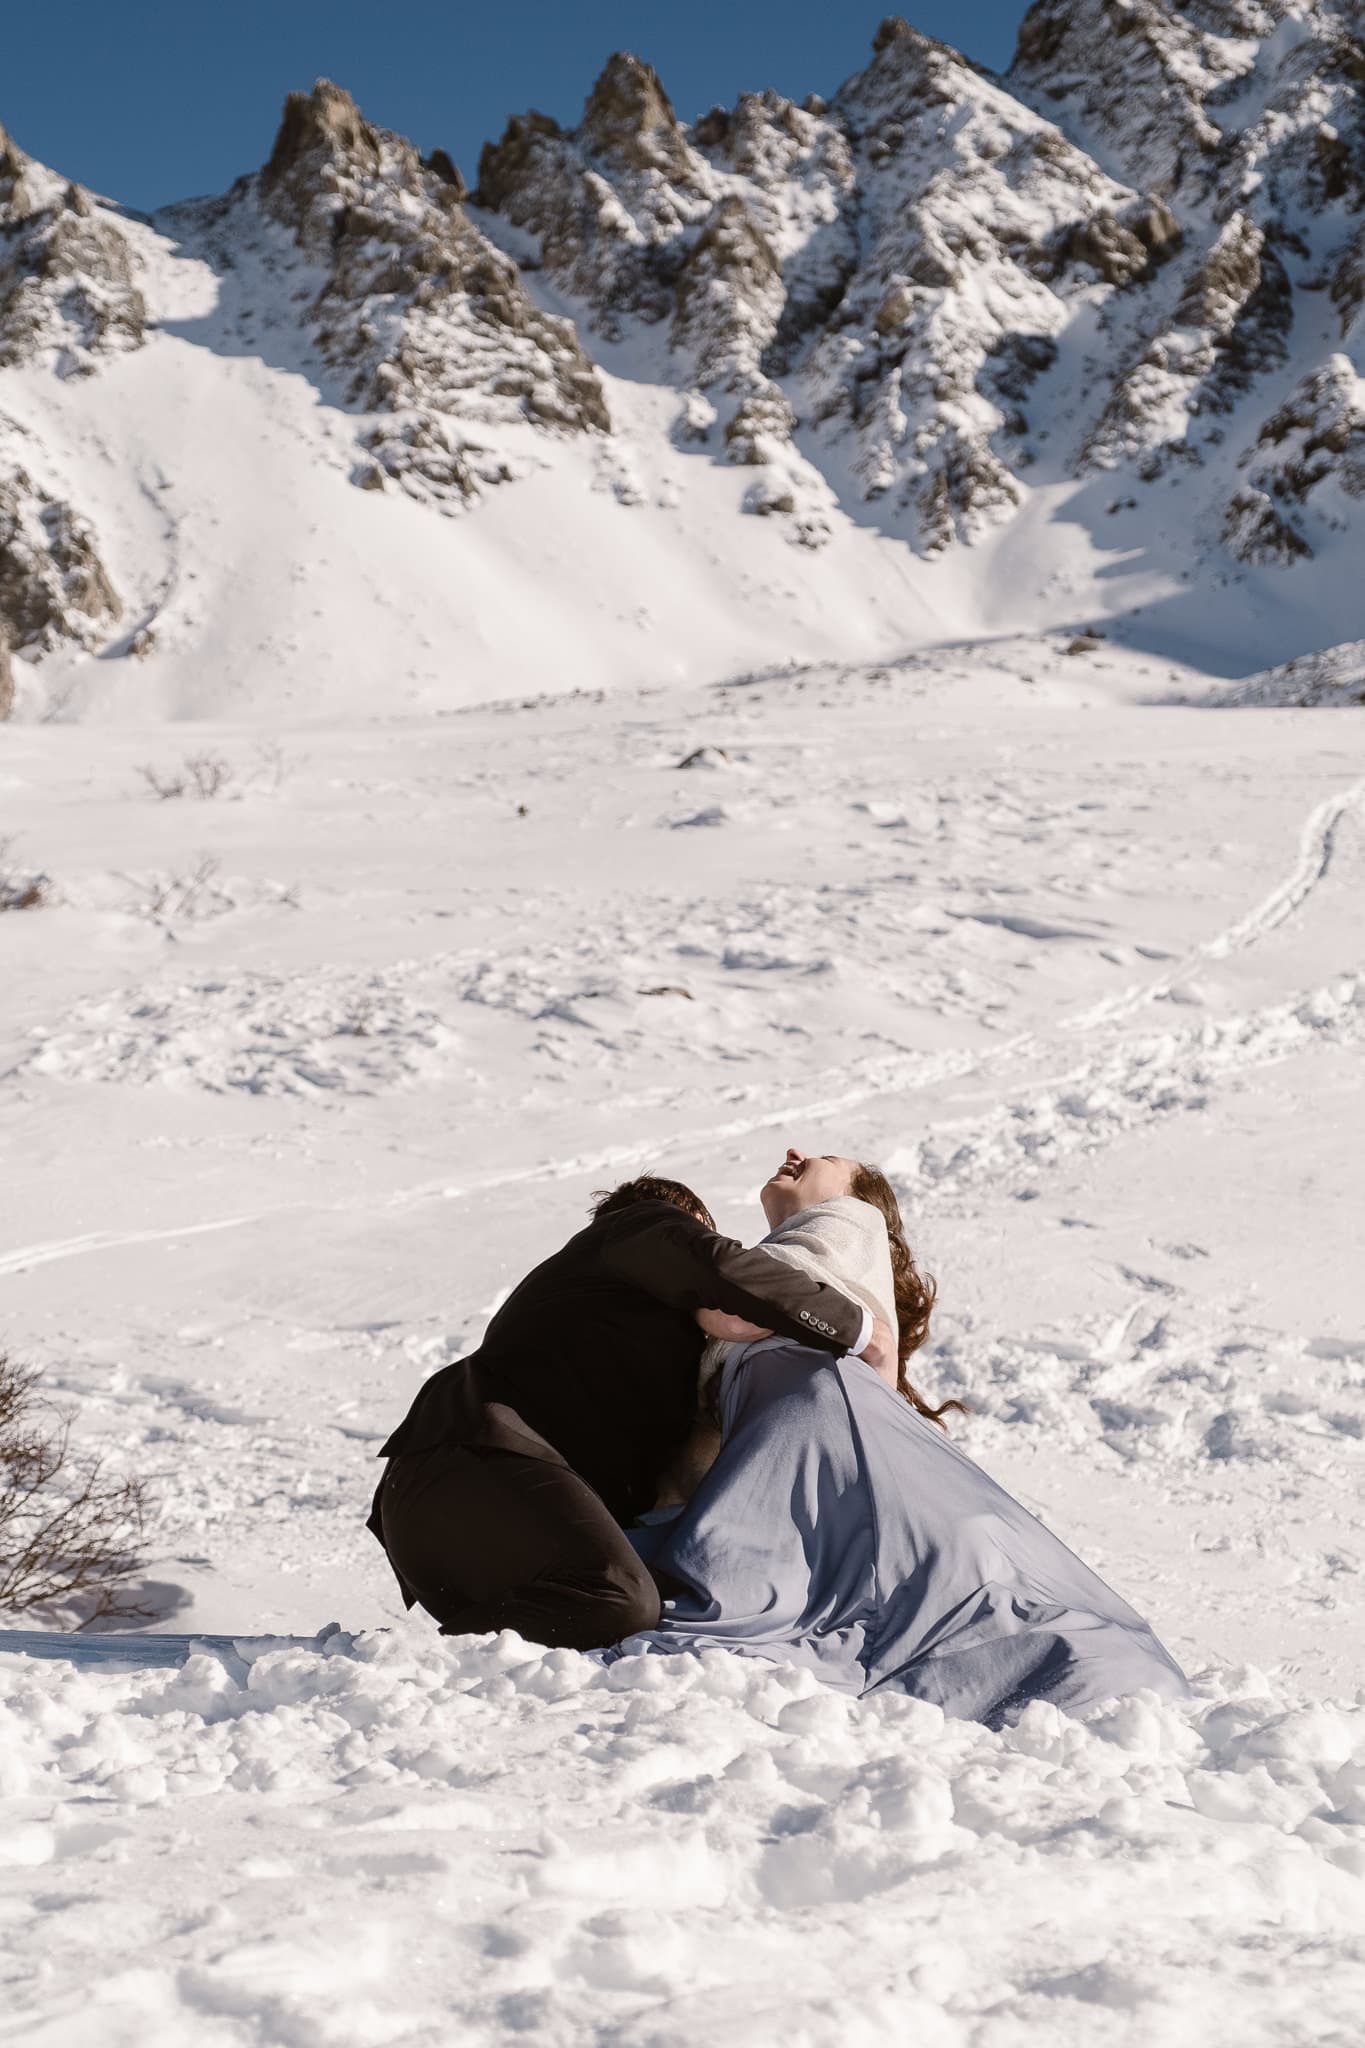 Bride and groom falling over in snow during first kiss, winter mountain elopement, Colorado snow elopement, winter wedding